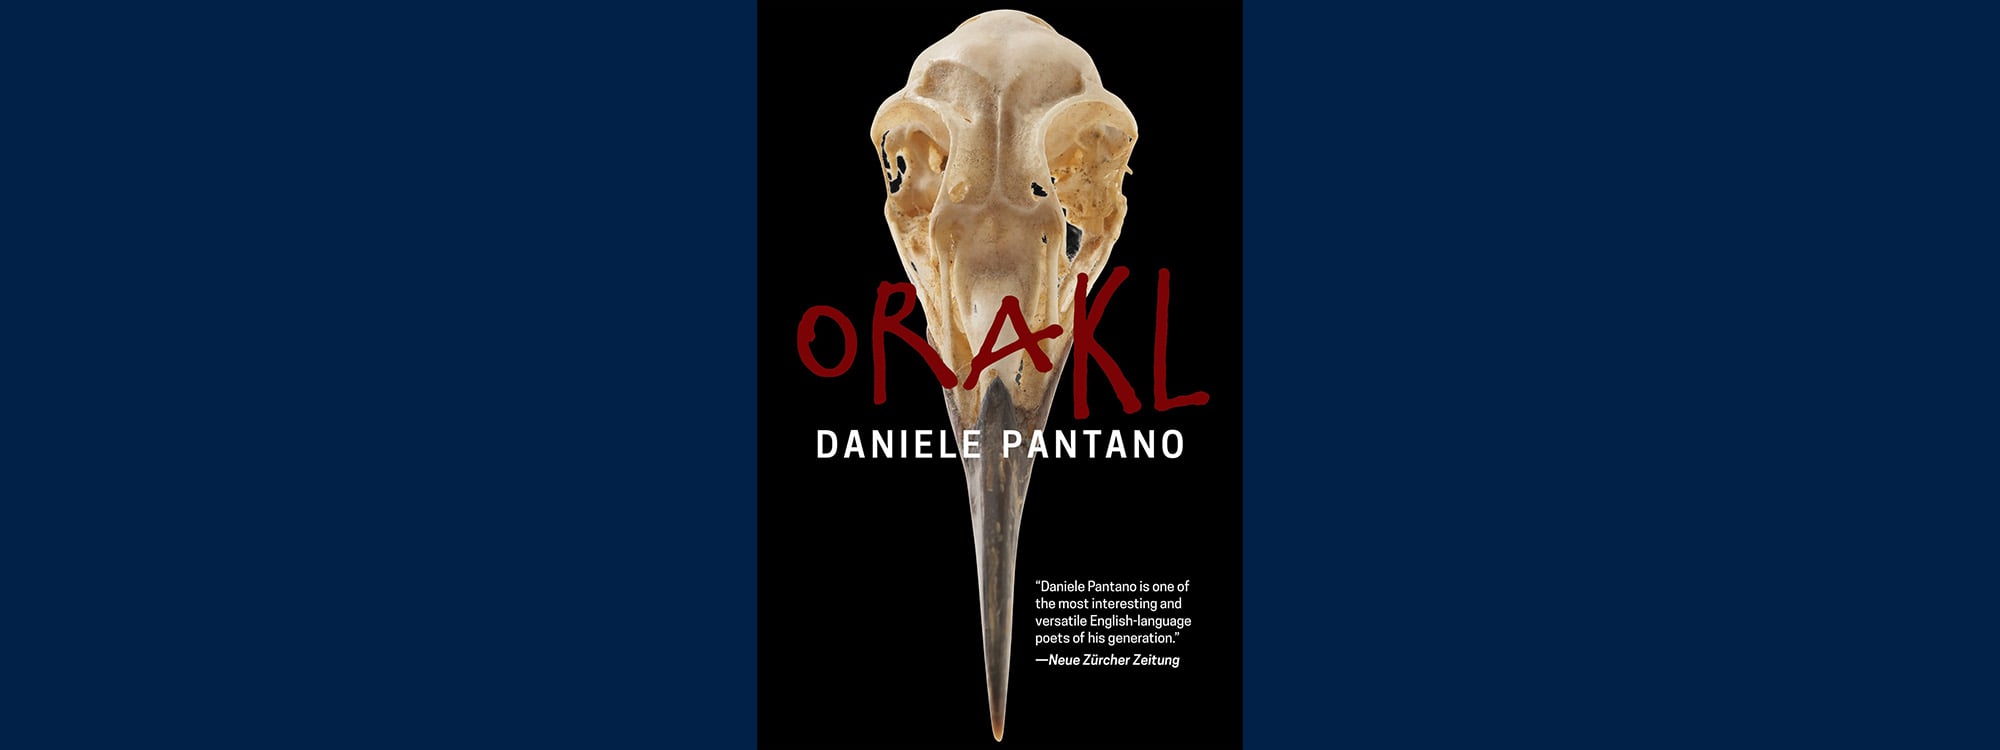 The book cover for Orakl. It features a bird skull.